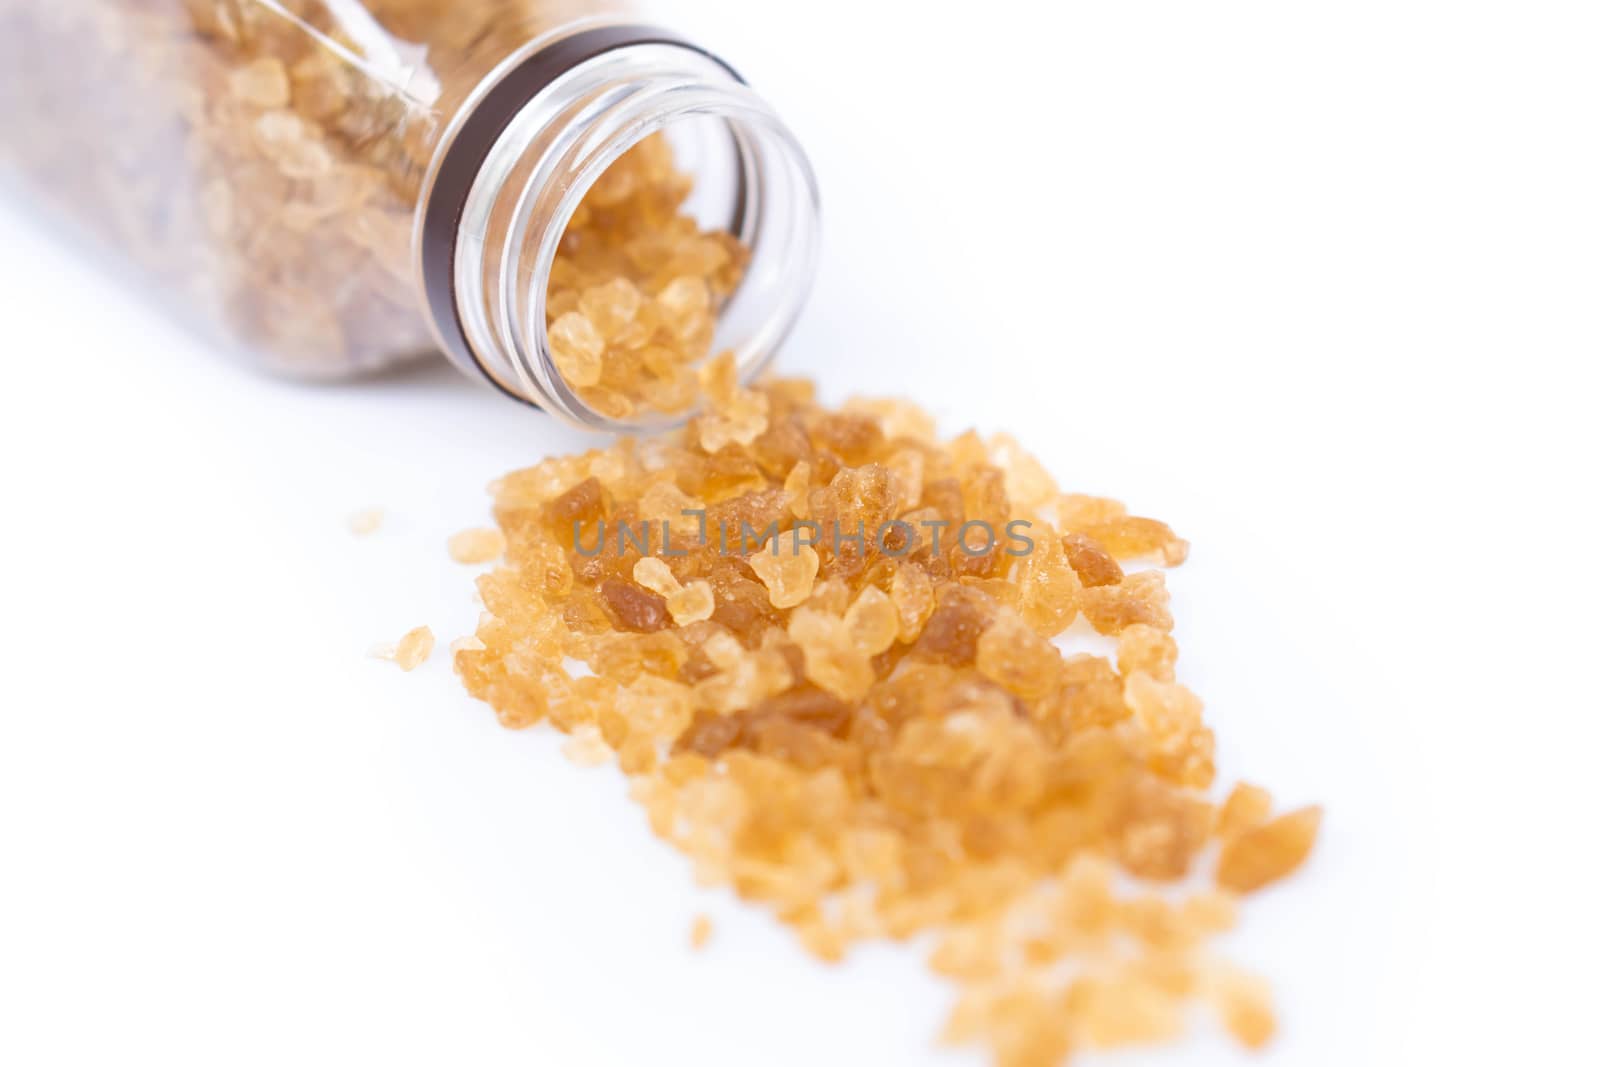 Closeup brown sugar with bottle on white background, healthy concept, selective focus